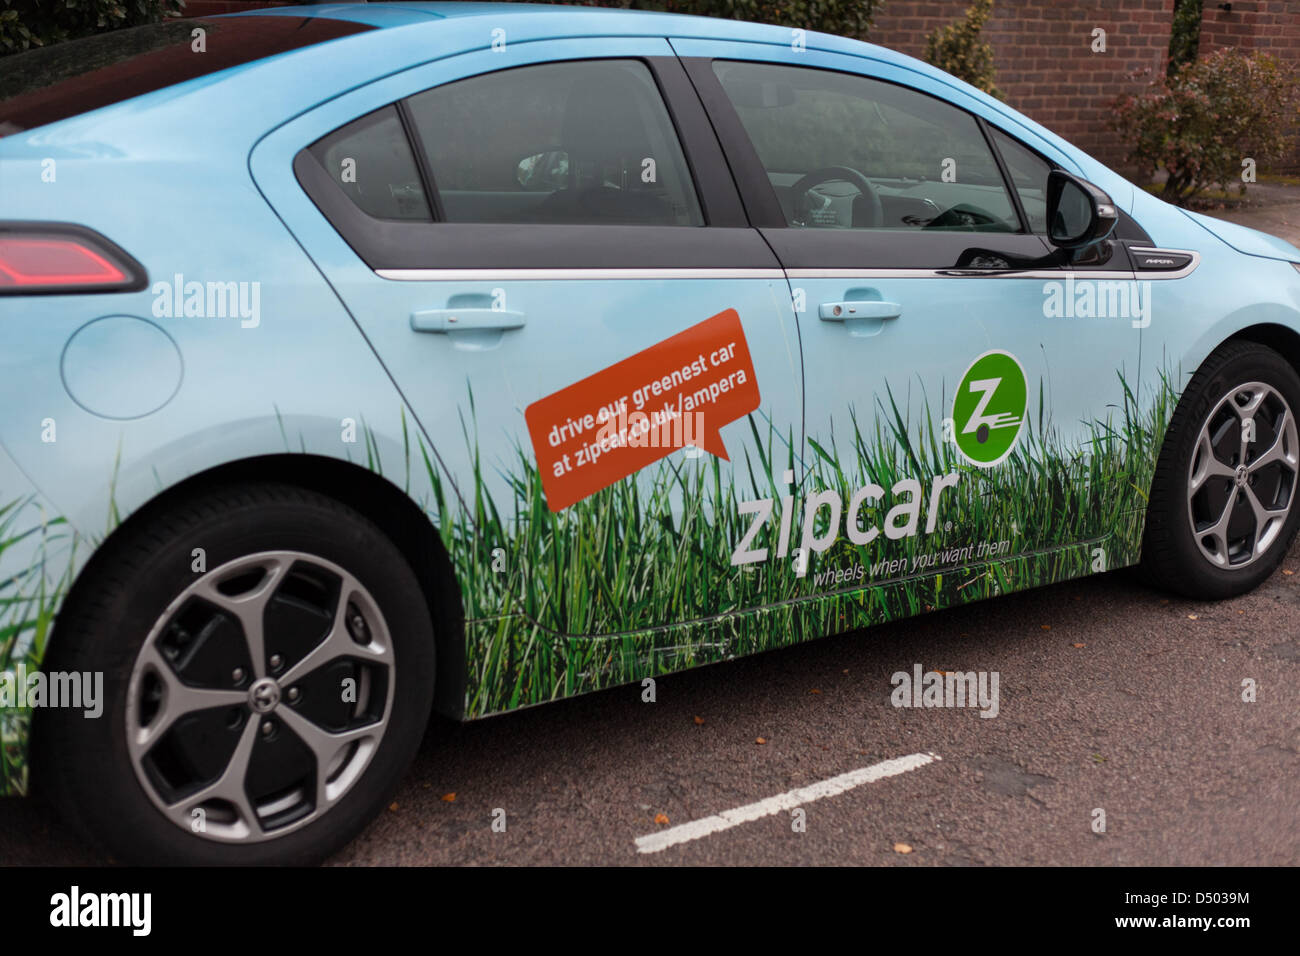 An Opel Ampera electric car participates in 'zipcar's car sharing network- Stock Photo